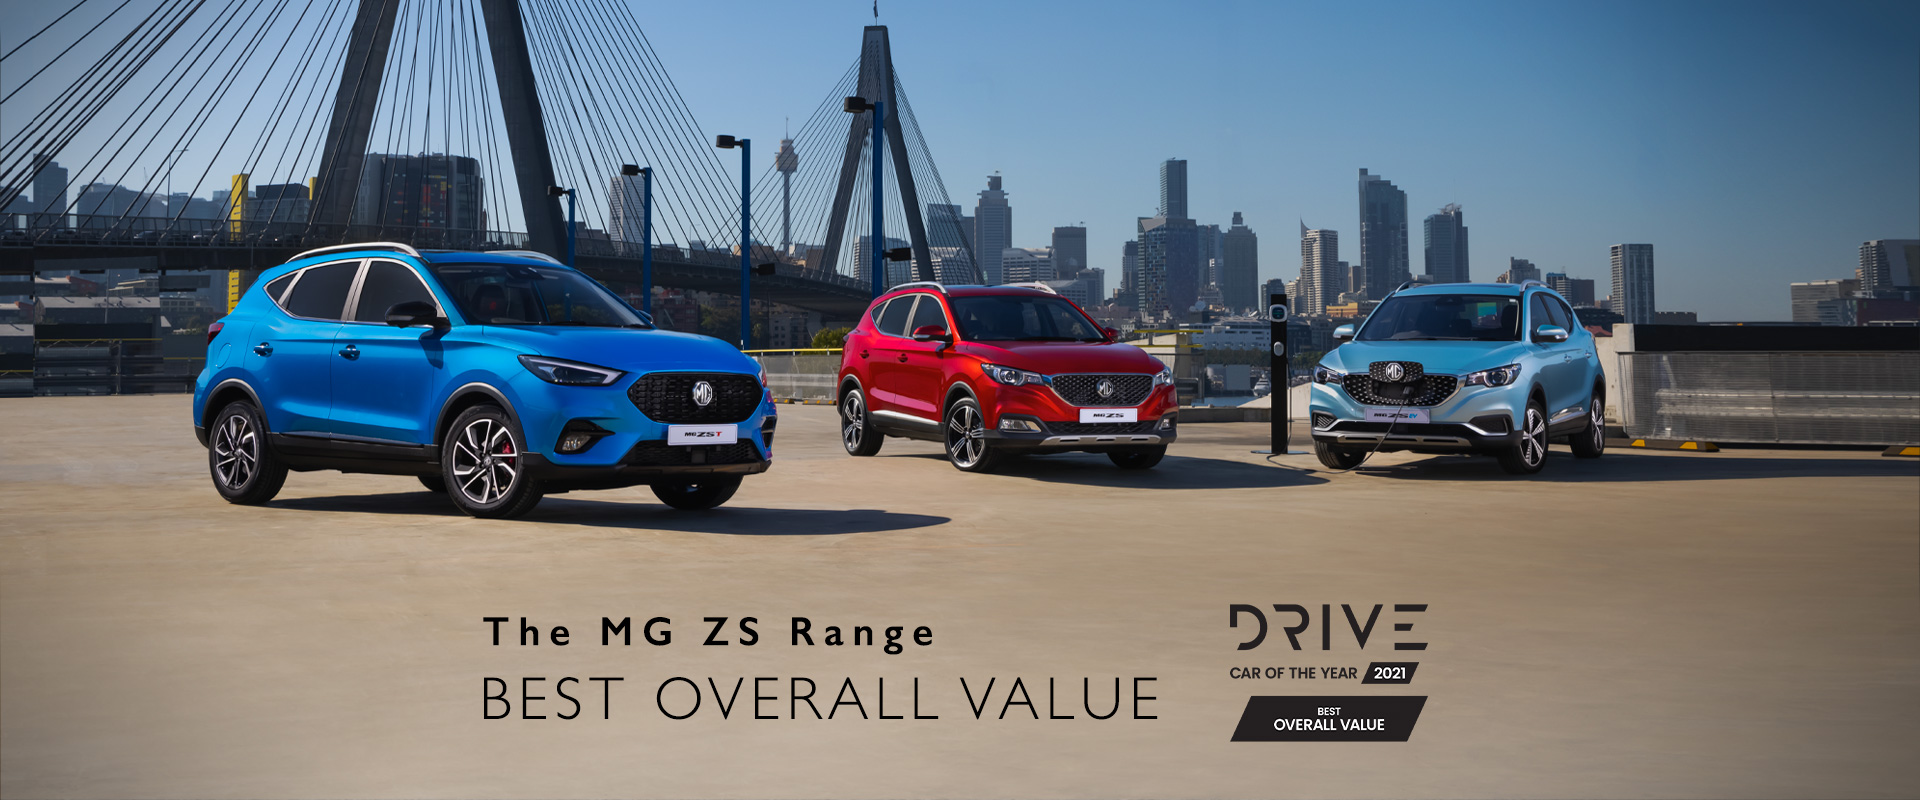 The MG ZS Range - Best Overall Value